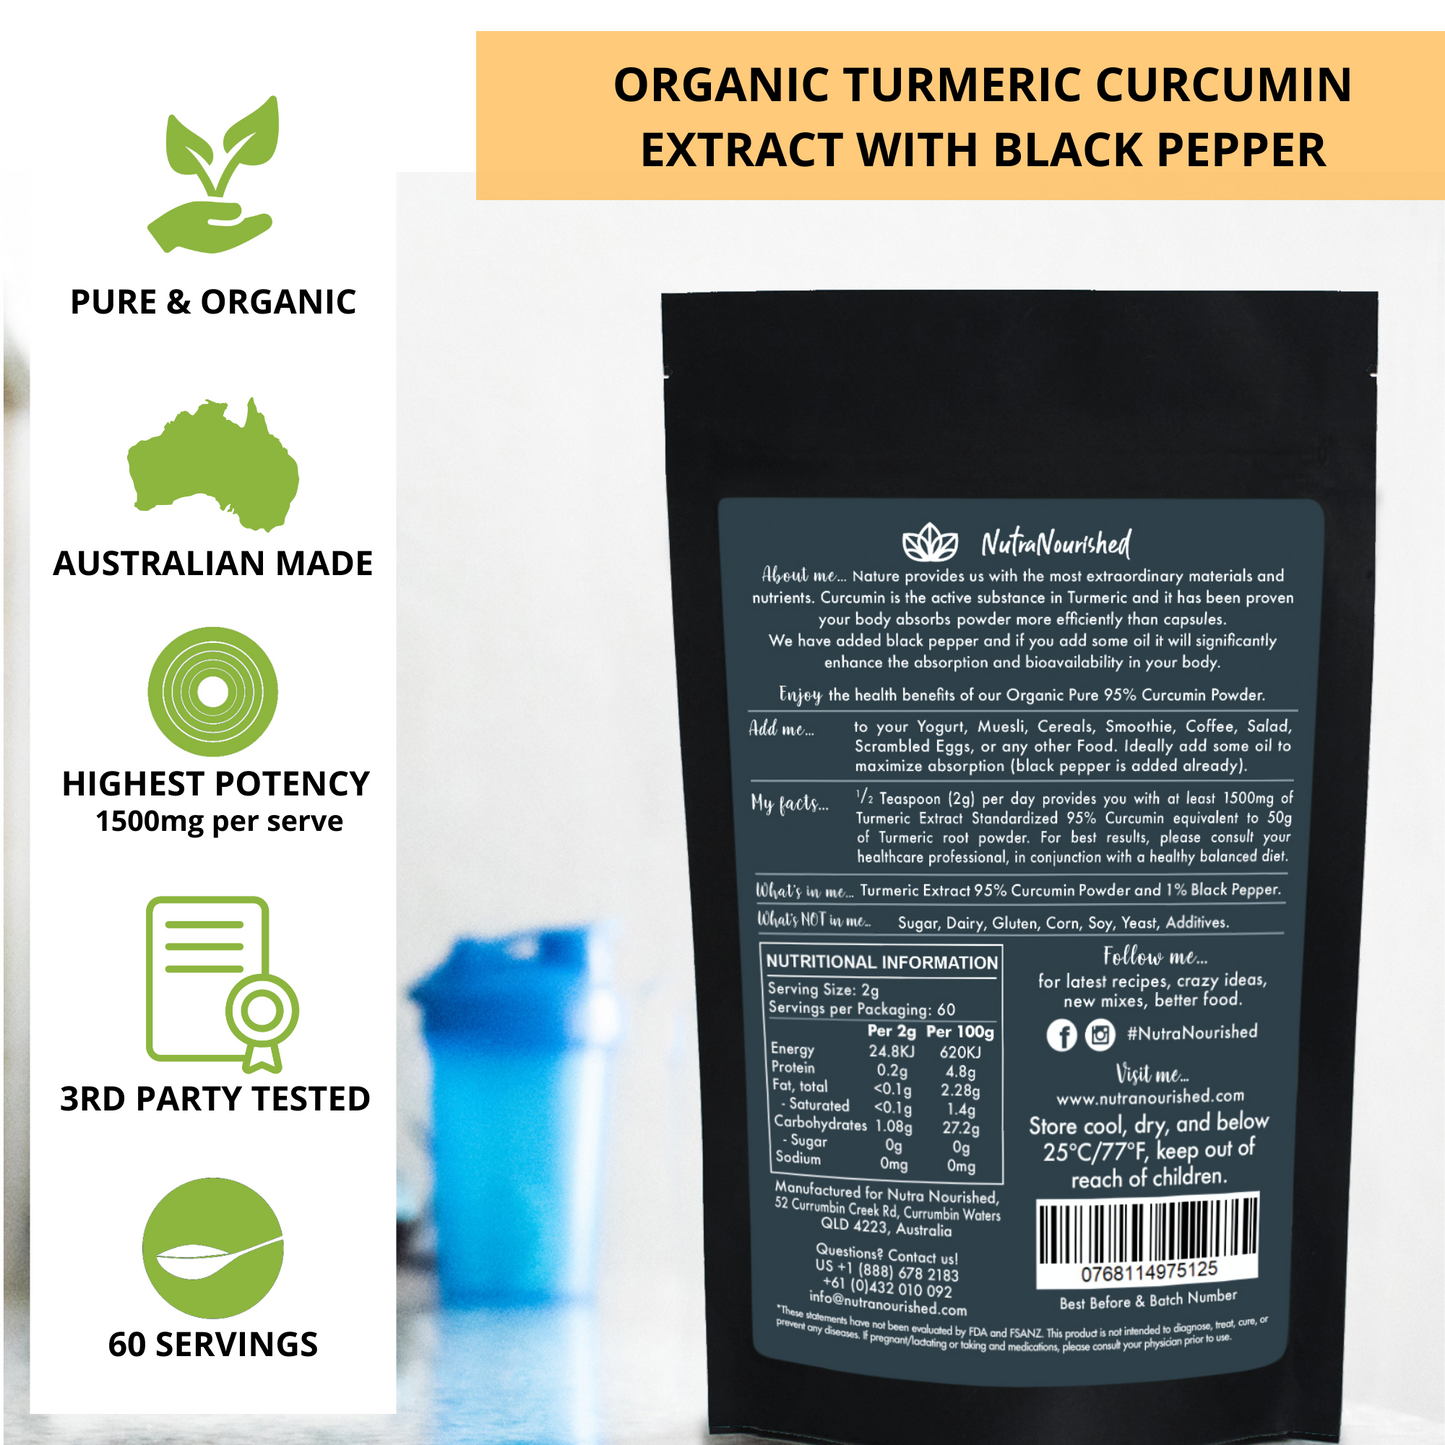 Antique White Pure Organic 95% Curcumin Powder - 1500mg of Turmeric Extract Buffered with Black Pepper